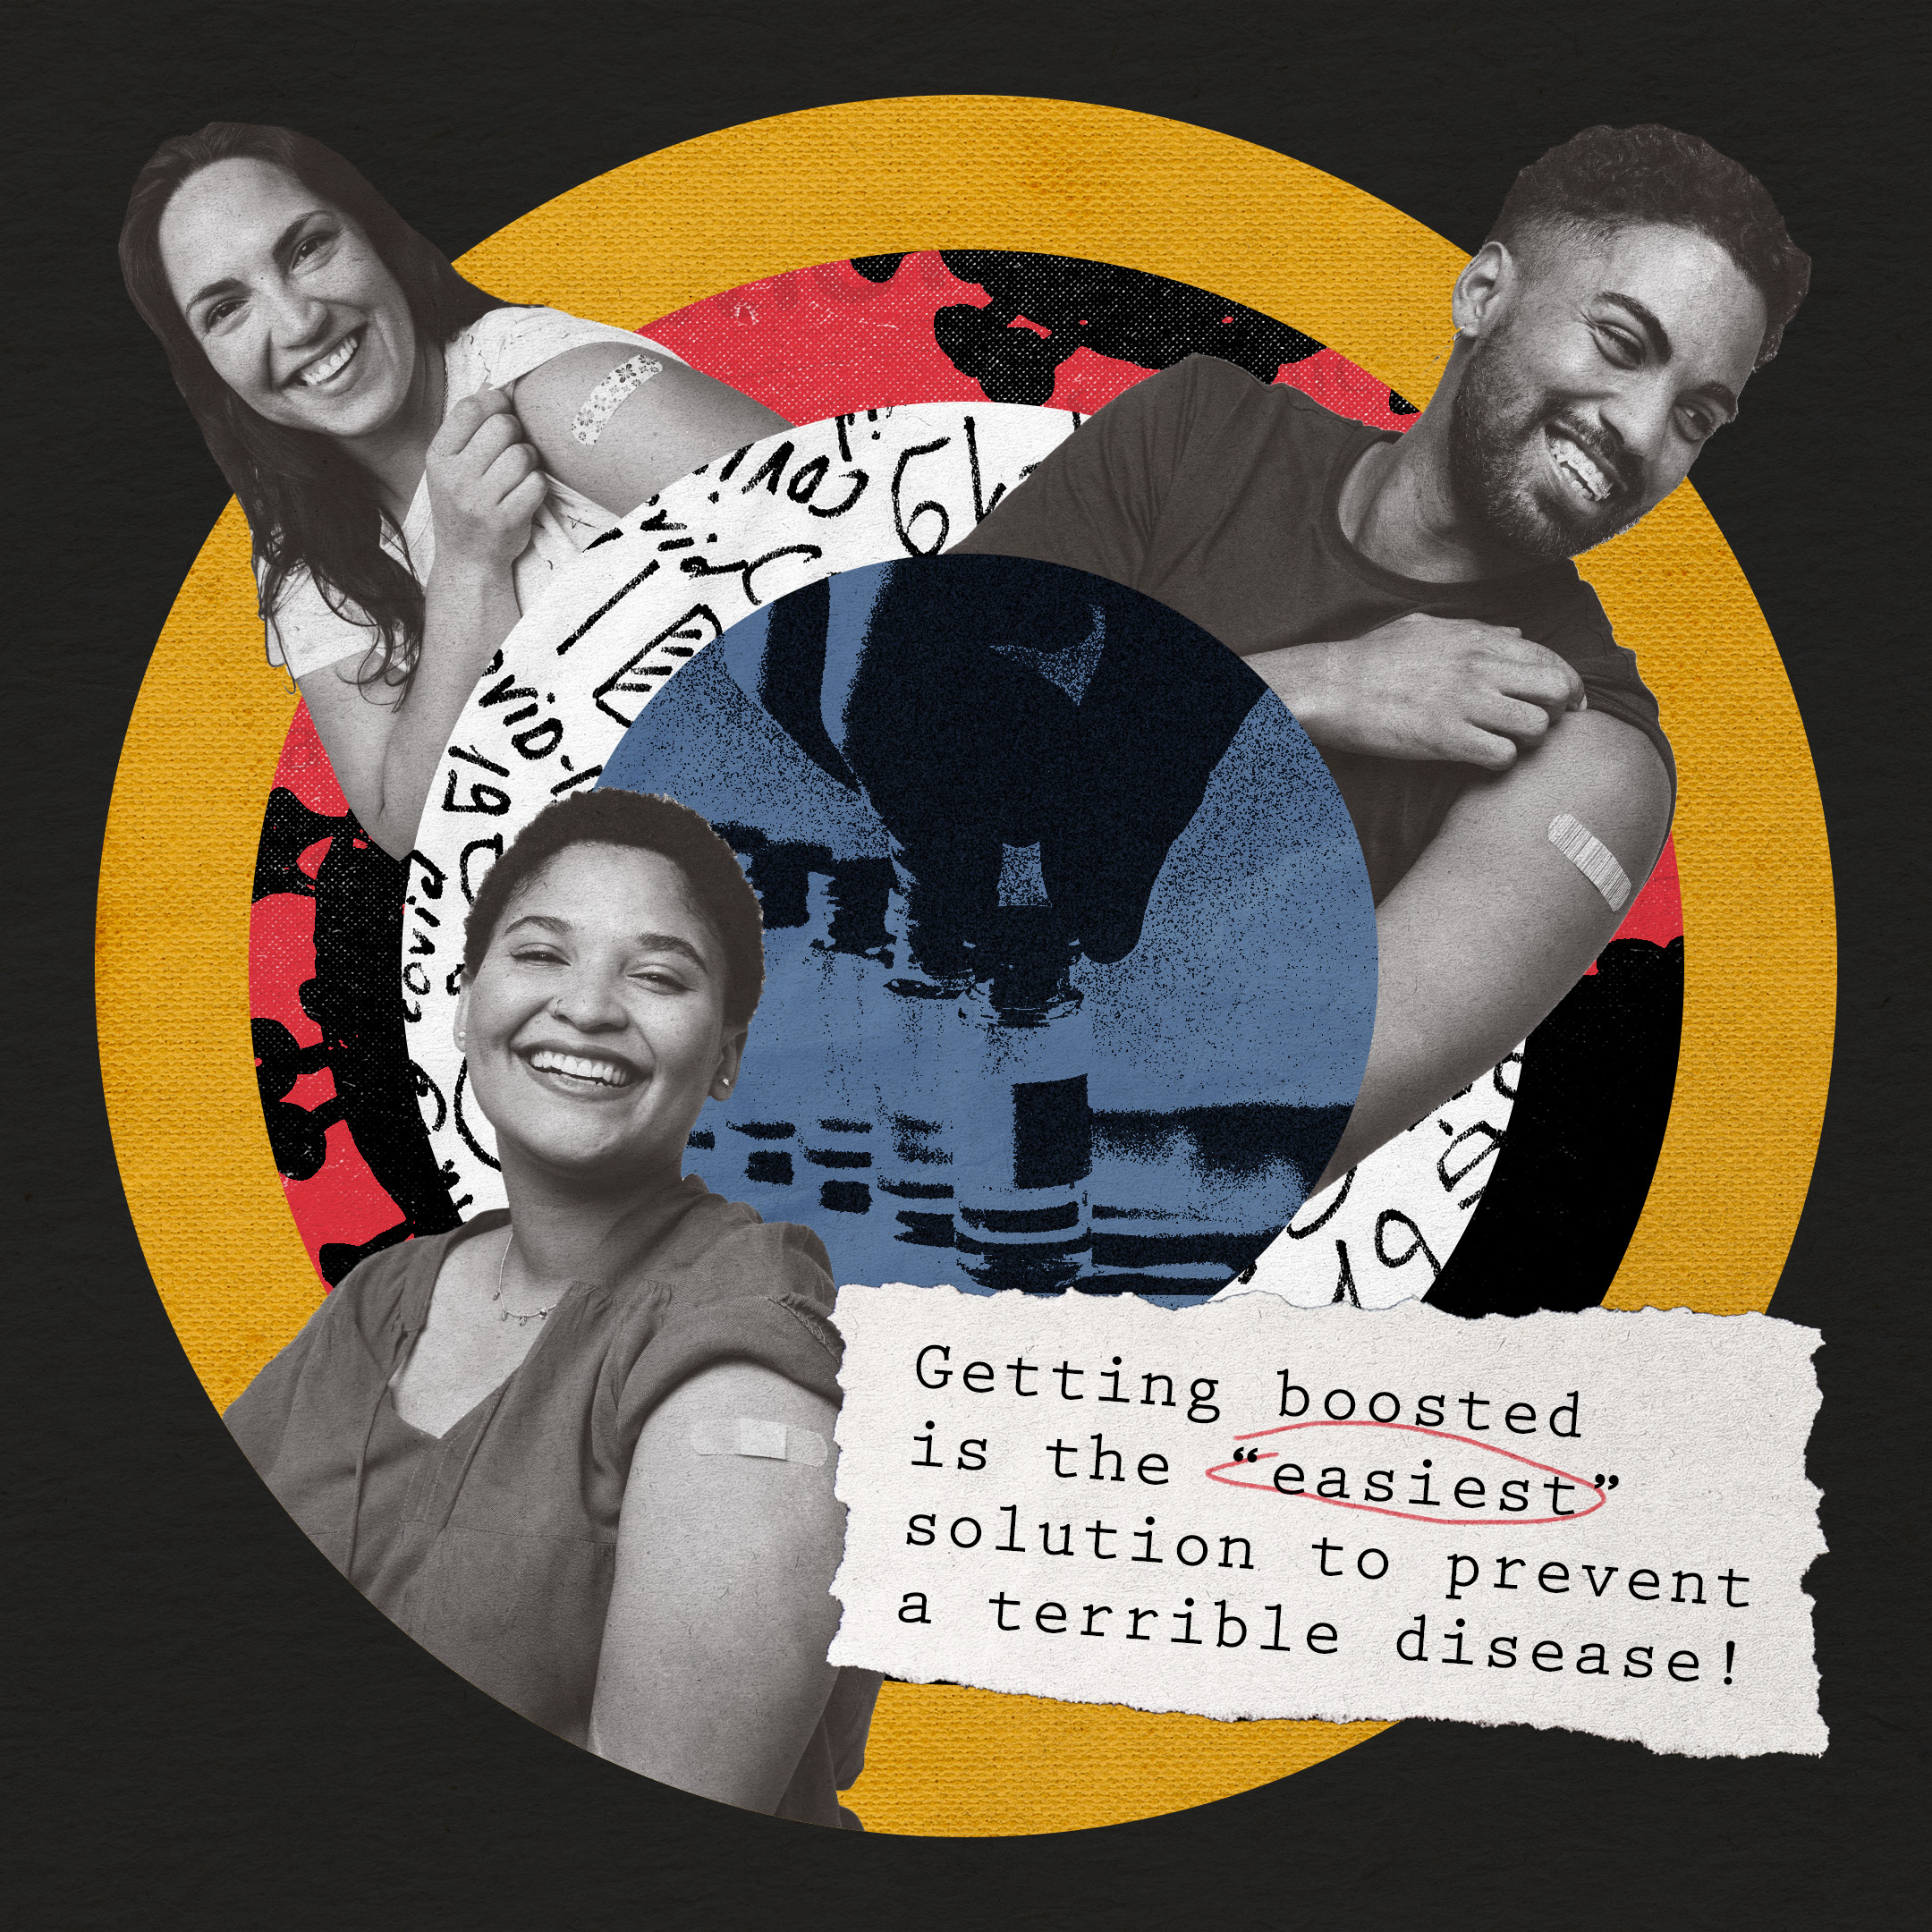 Three young people of multiple races/ethnicities smiling and showing adhesive bandages on their arm. Text reads "Getting boosted is the "easiest" solution to prevent a terrible disease!"